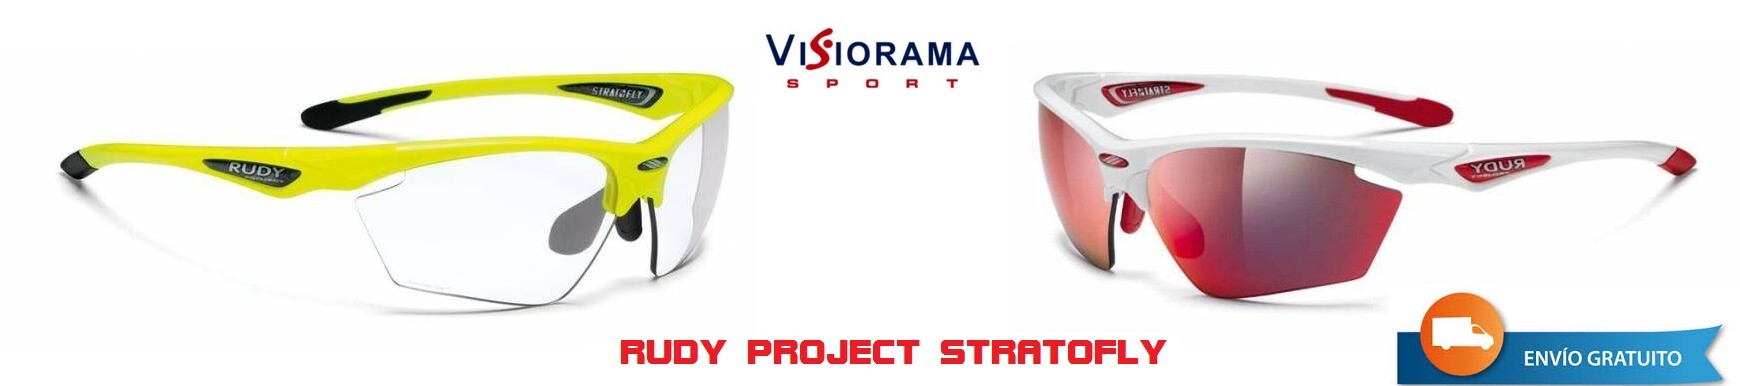 Rudy Project promotion in VisioramaSport